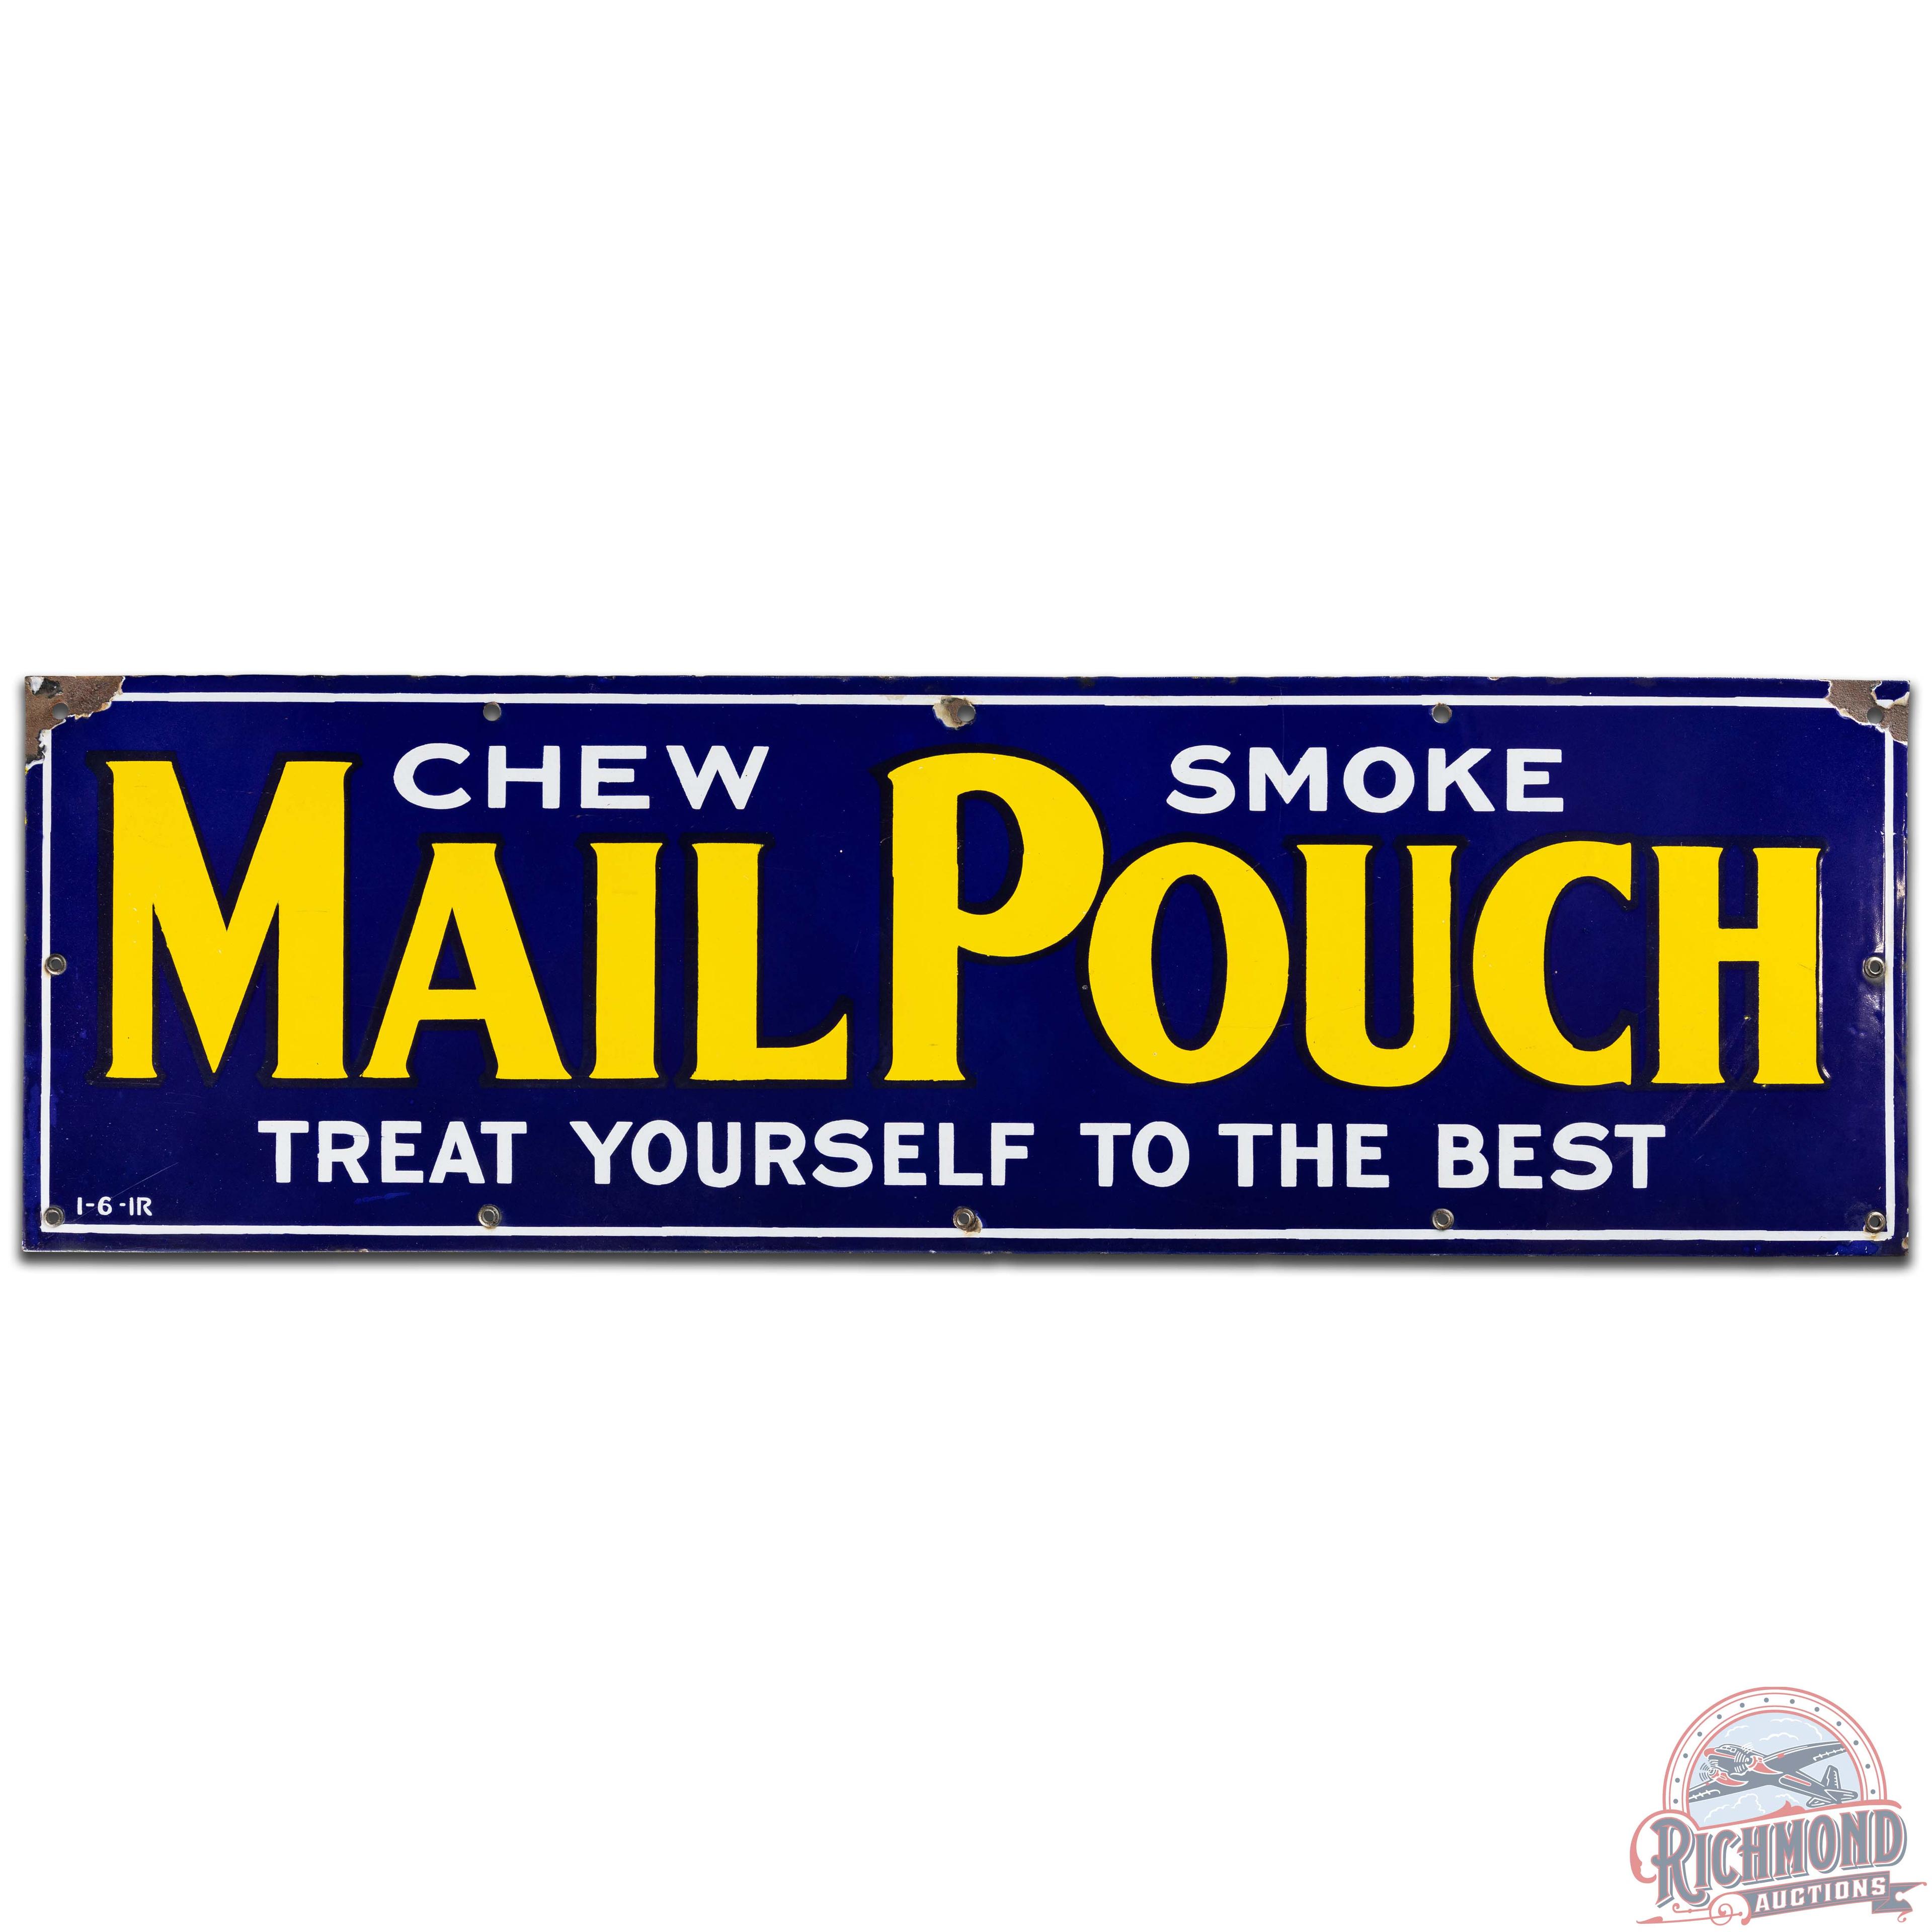 Mail Pouch Tobacco Treat Yourself to the Best SS Porcelain Sign